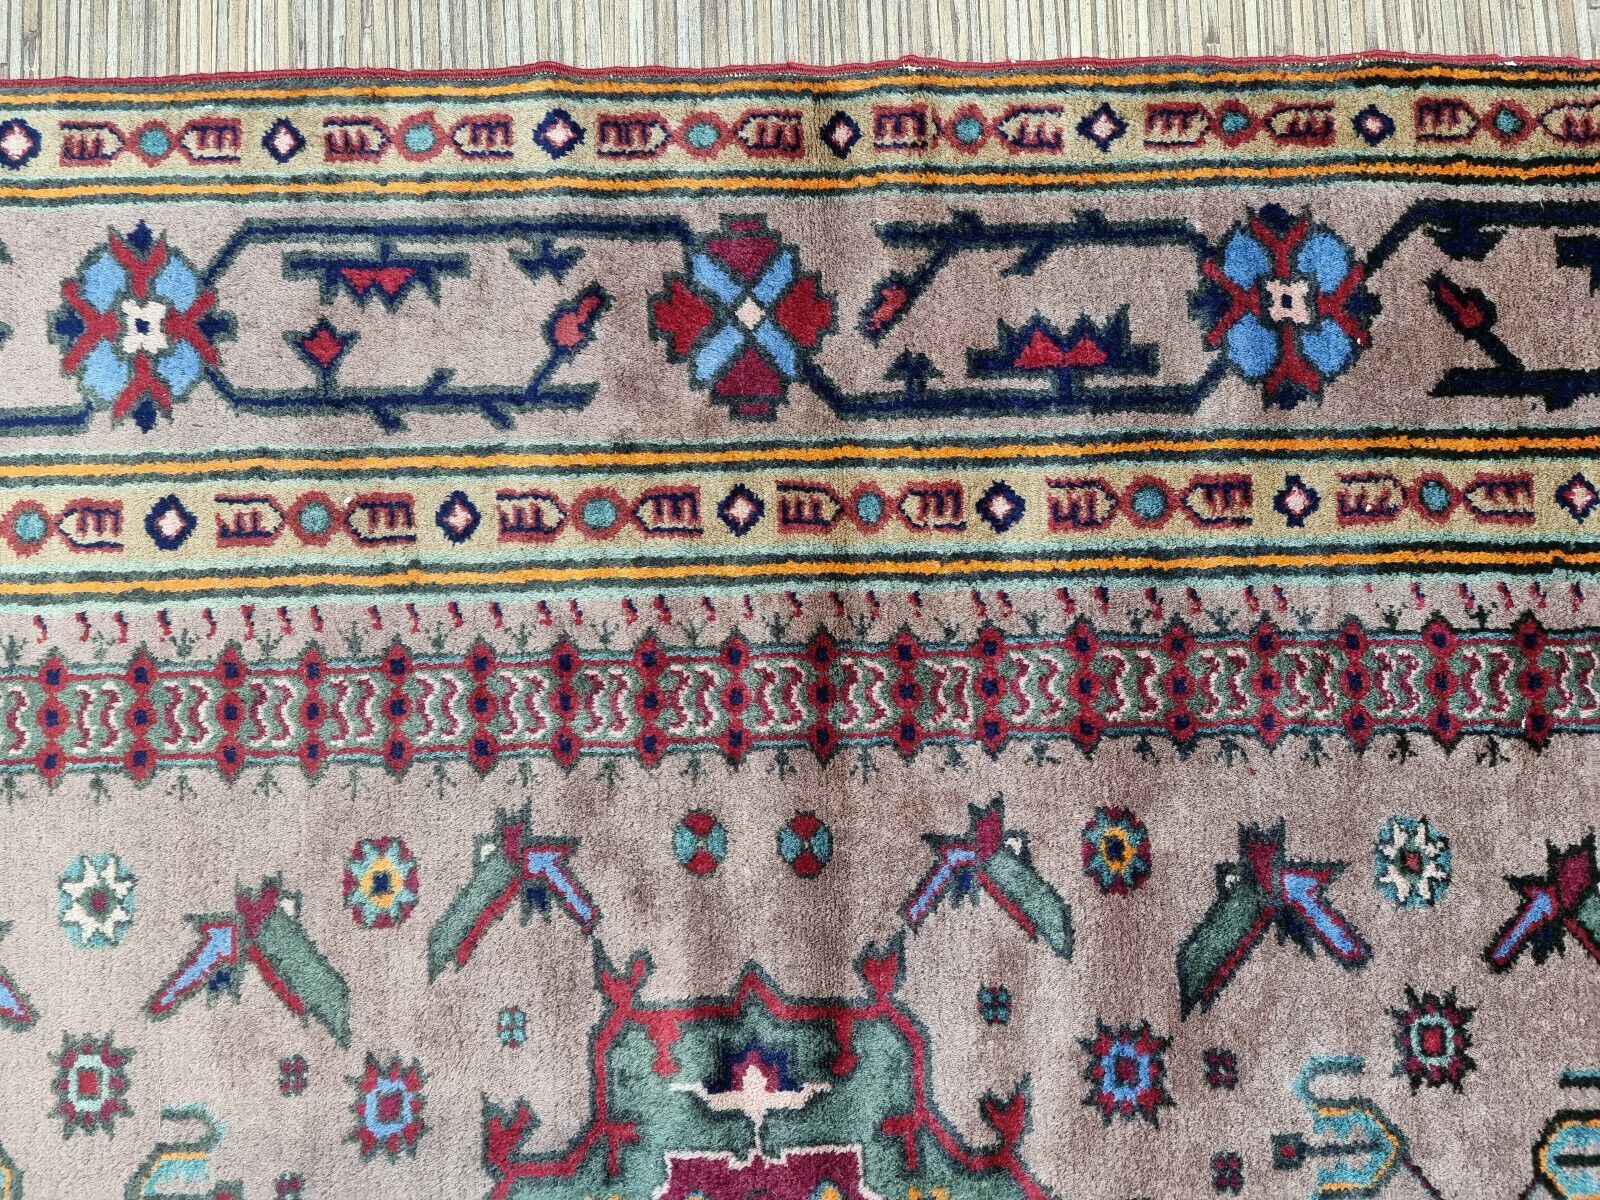 Close-up of beige tones on Handmade Vintage Caucasian Shirvan Rug - Detailed view emphasizing the subtle beige tones complementing the rug's color palette.